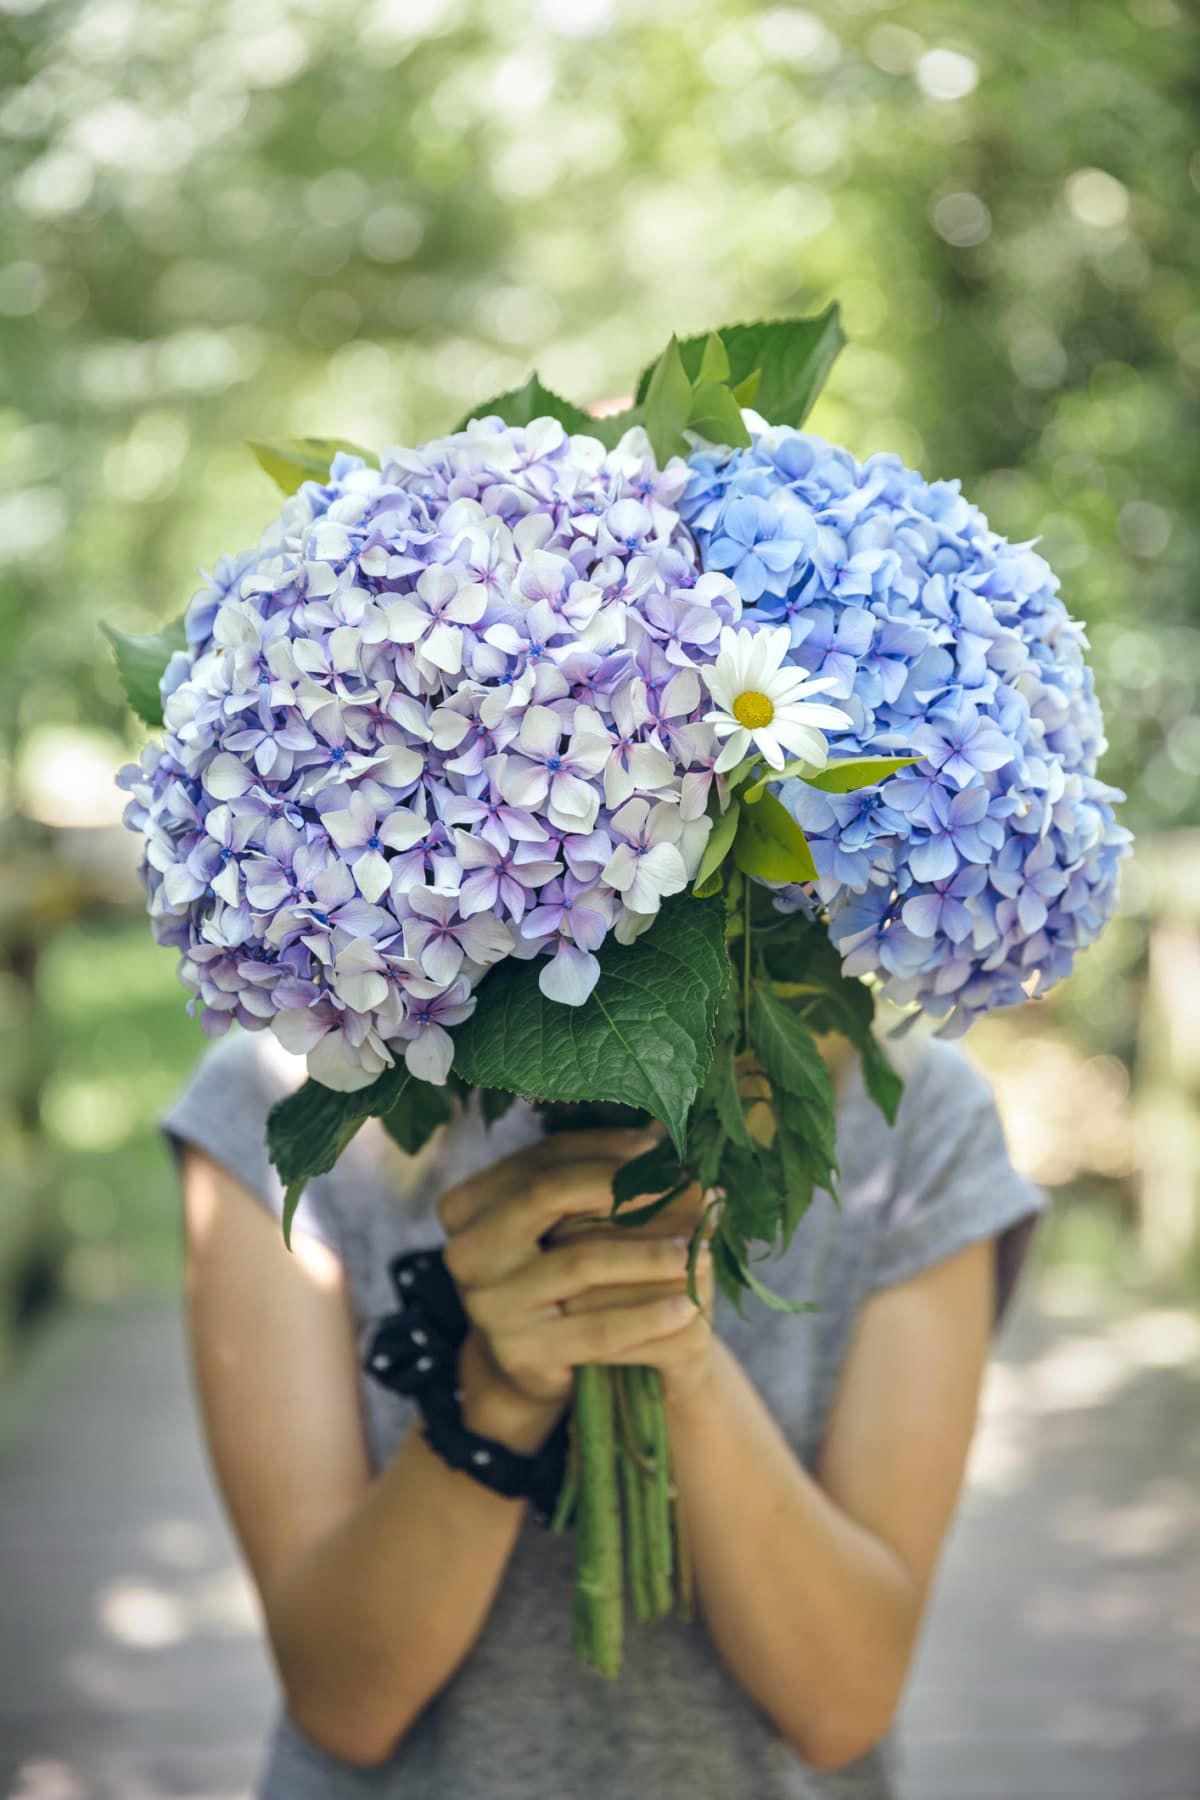 A person holding up bunches of purple hydrangeas